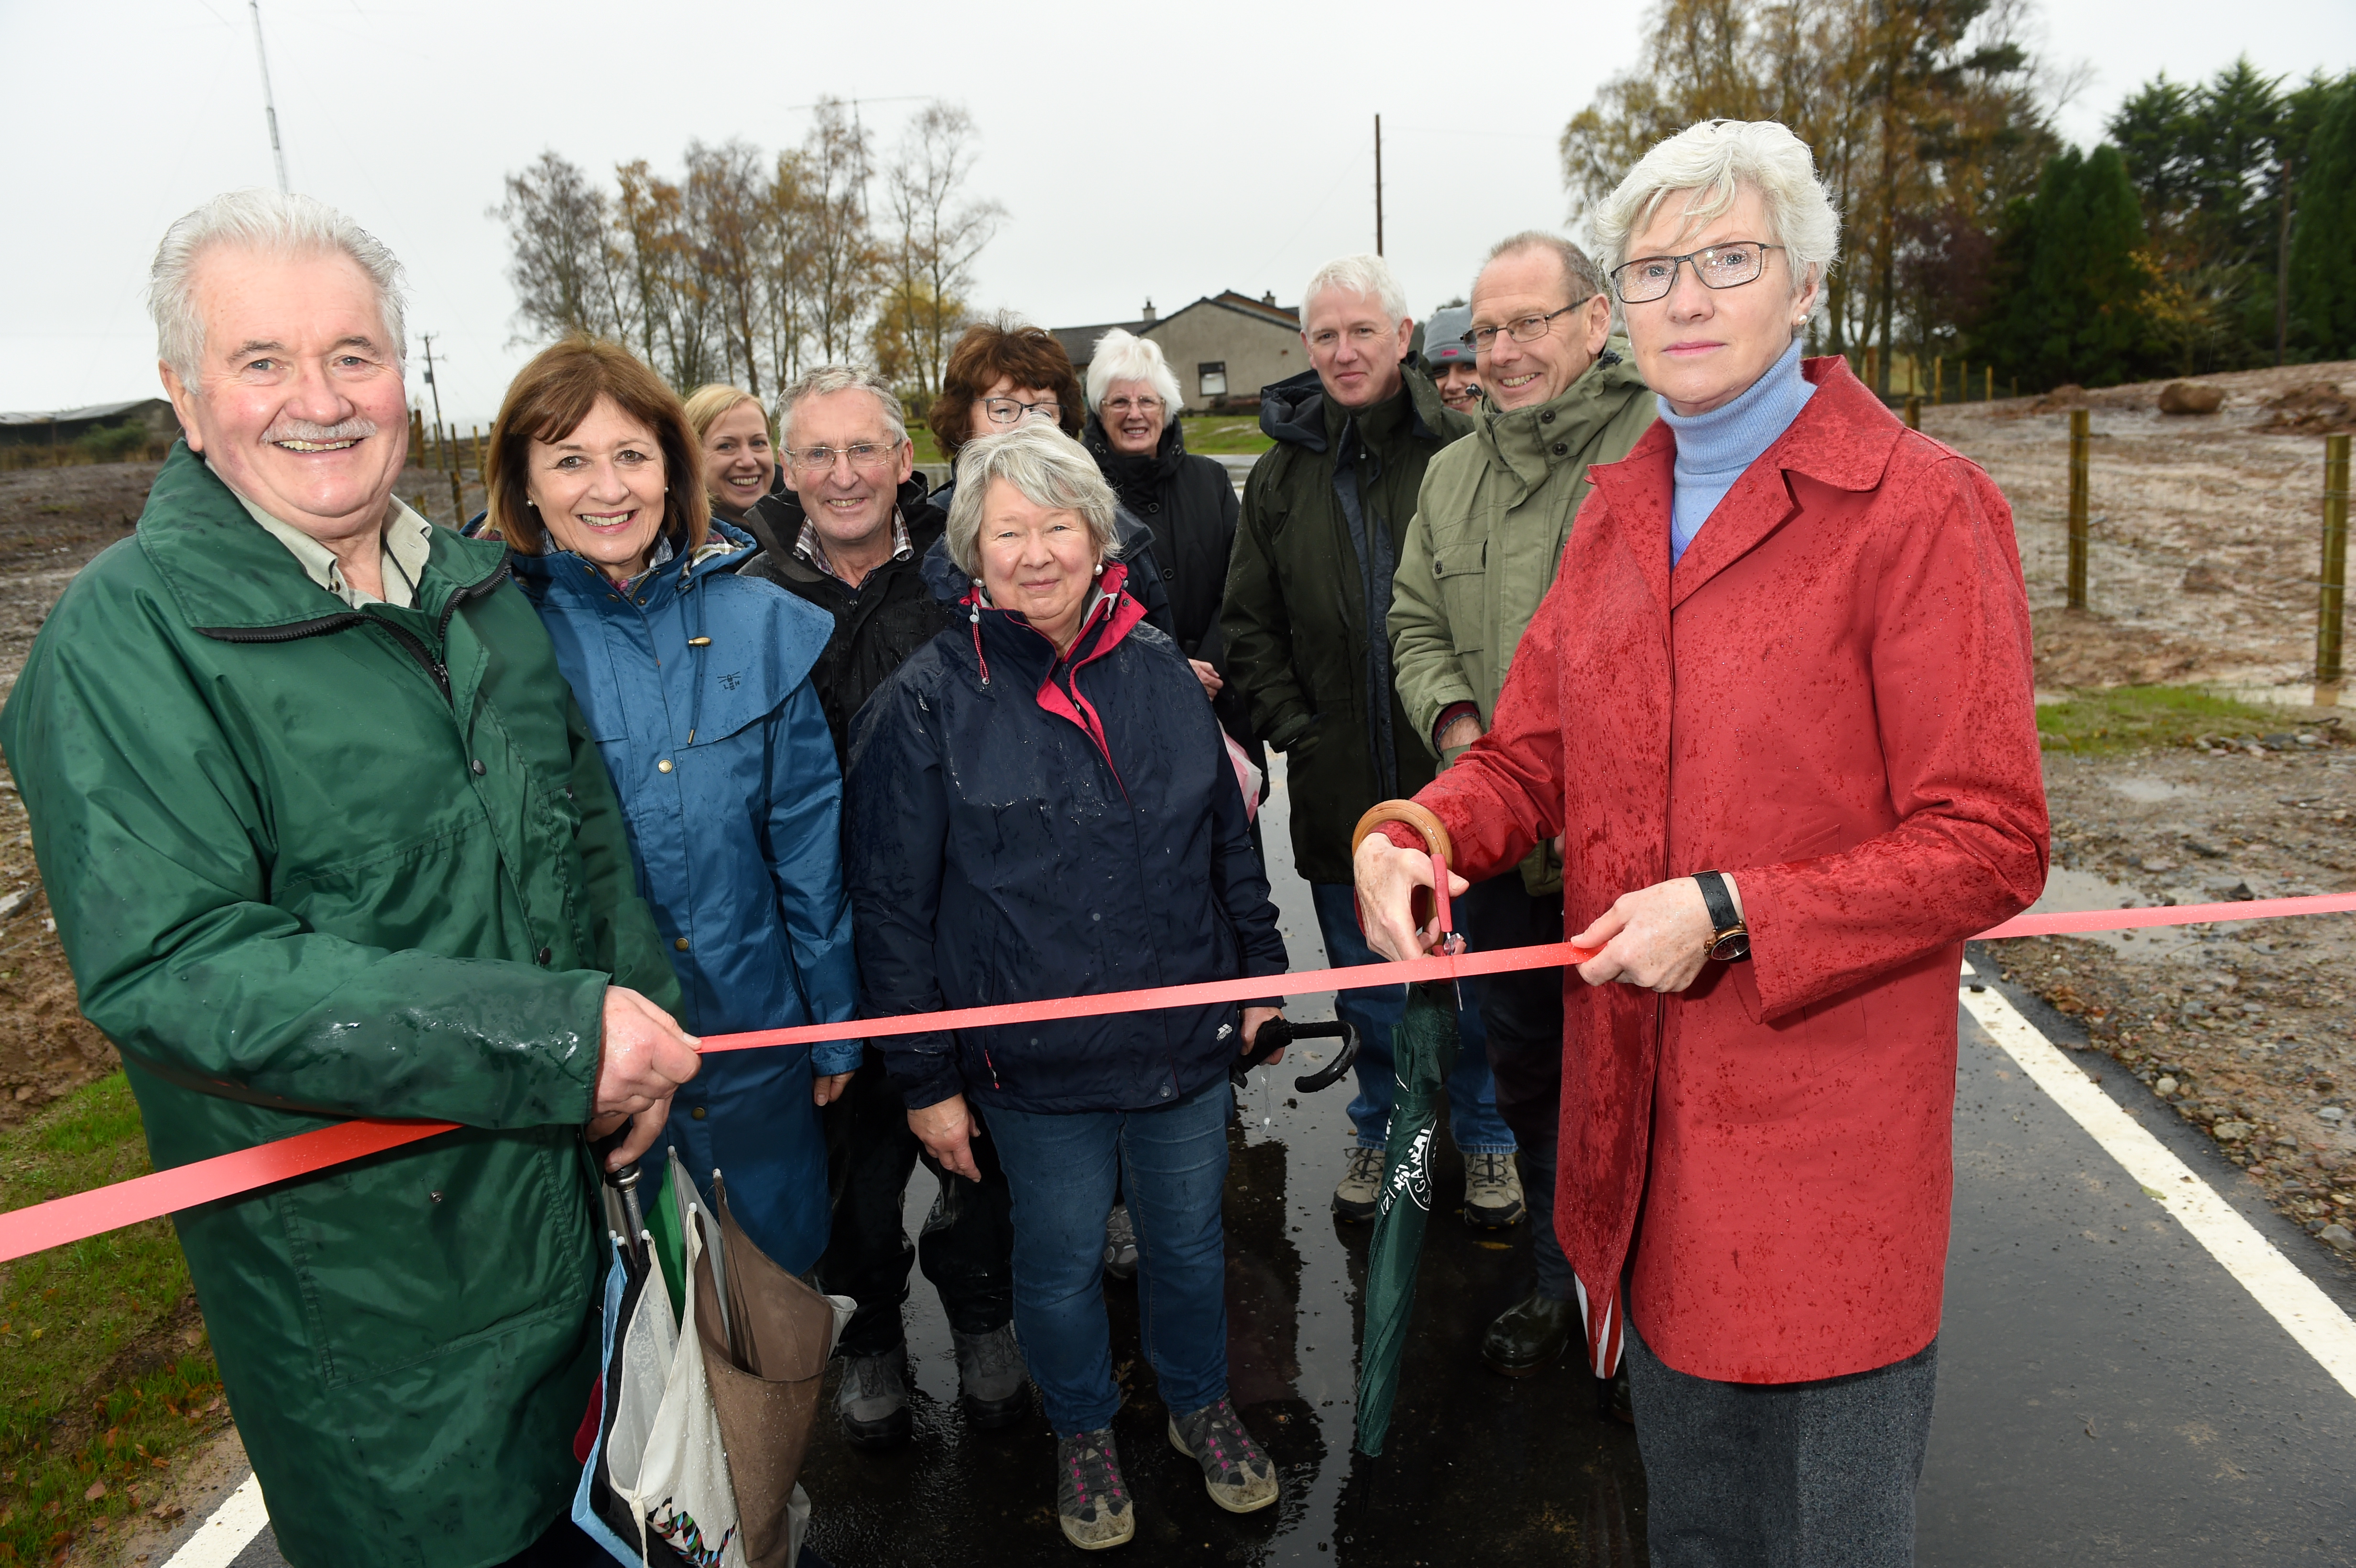 Former Highland Councillor Isobel McCallum cuts the ribbon to officially open the new junction. Also in the photograph are local campaigners who fought for the improvements. Picture by Sandy McCook